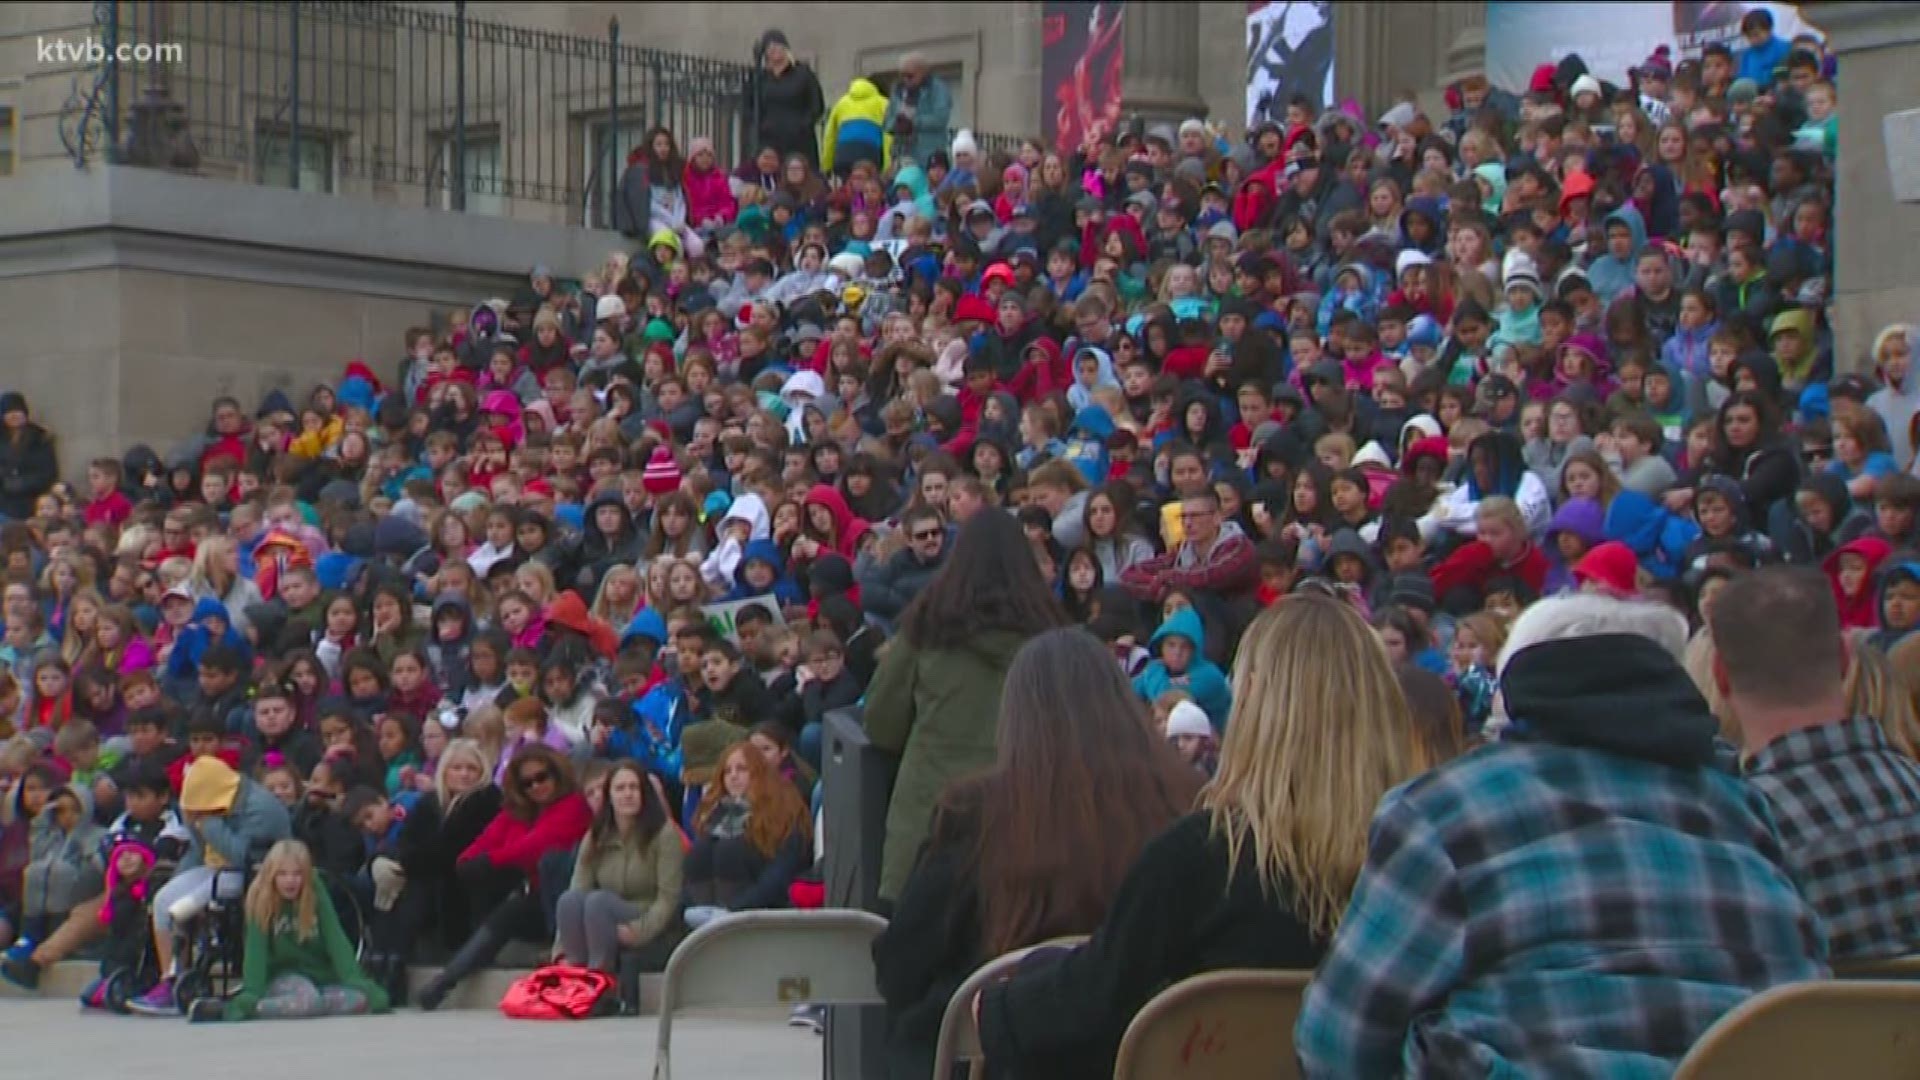 The drug prevention campaign kicked-off with a rally at the Idaho Capitol Monday.